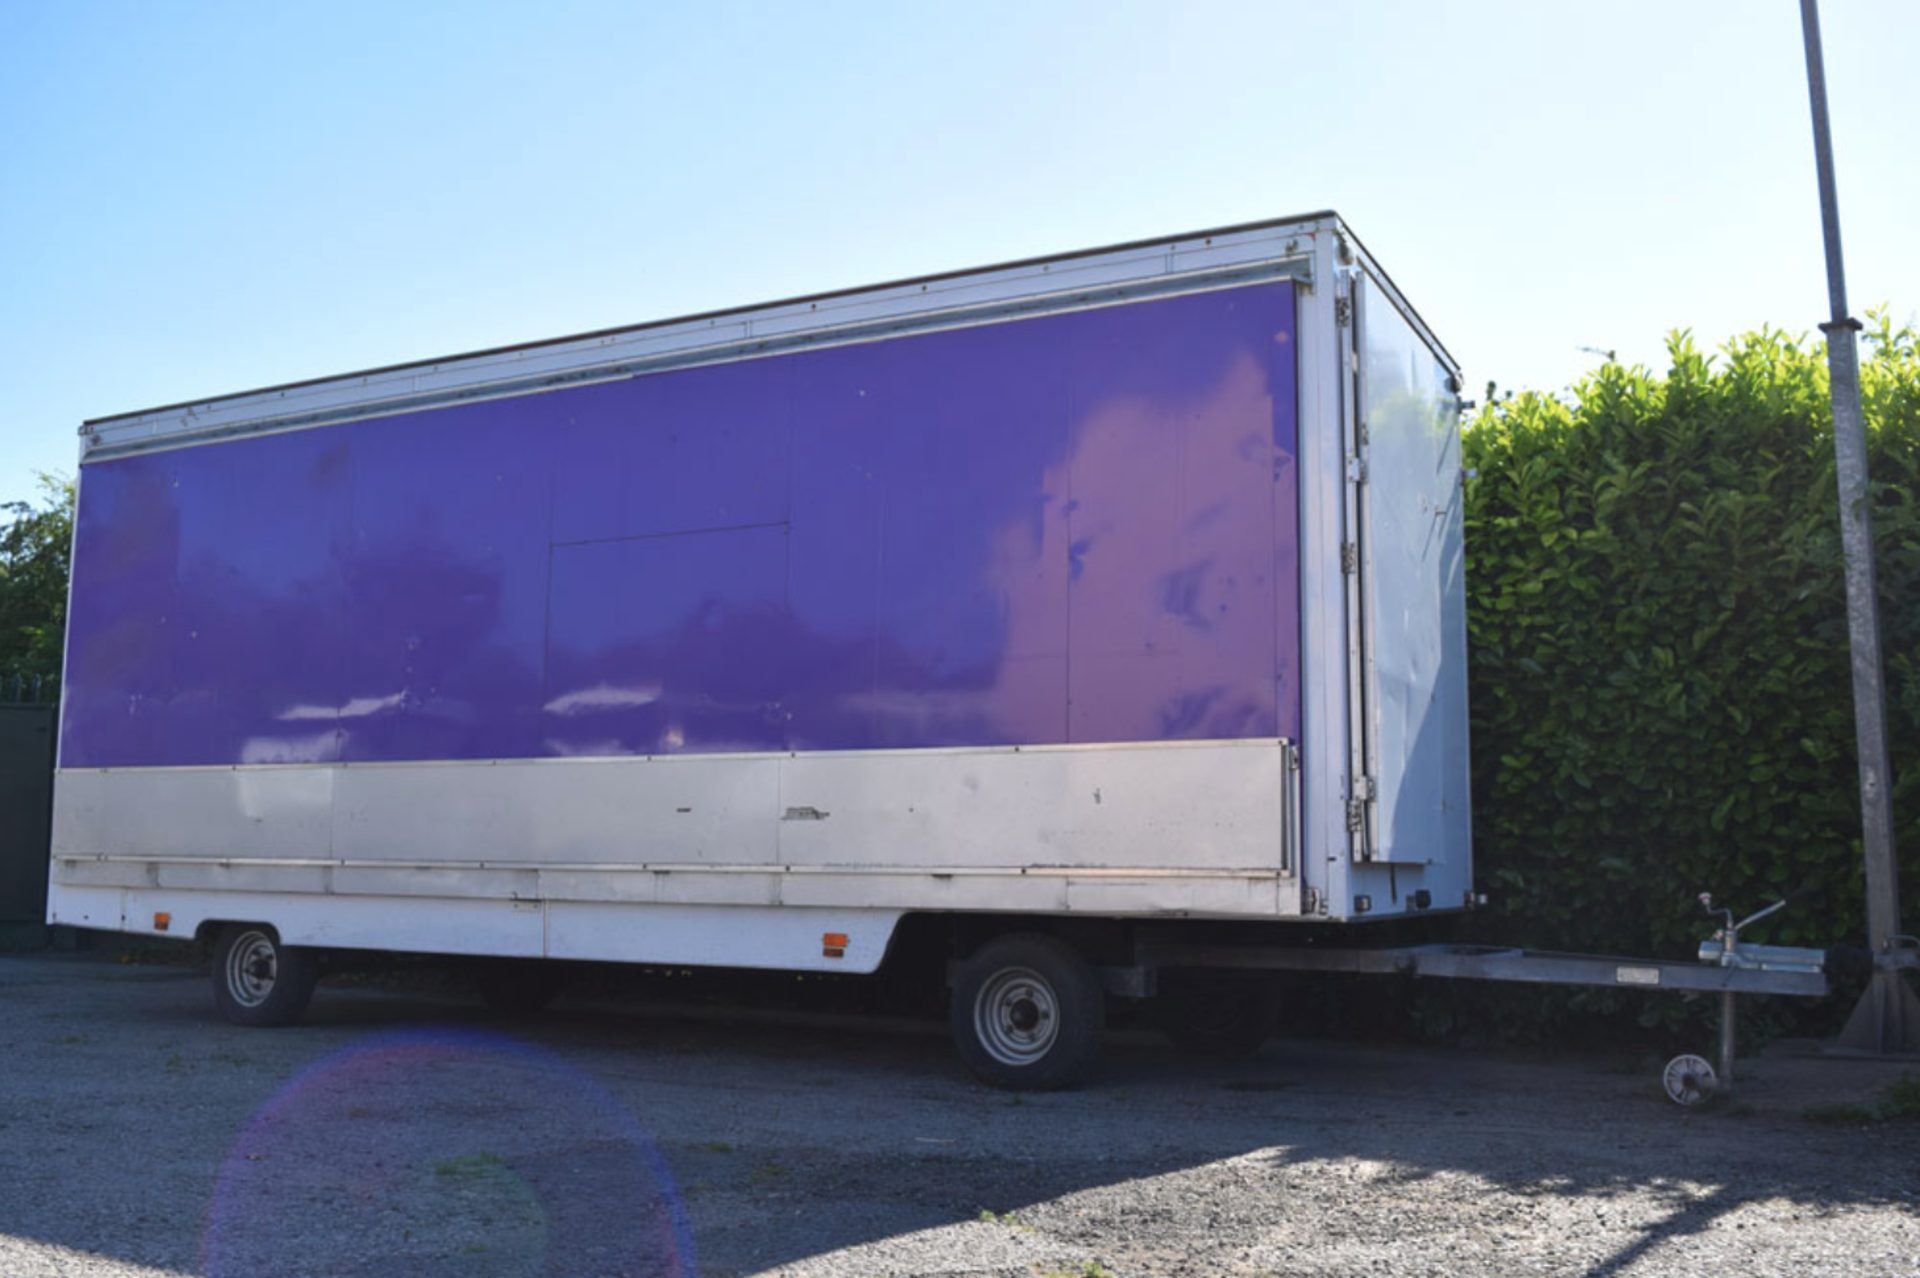 Torton 7 Meter Exhibition Show Hospitality 3500kg Trailer (folded images attached) - Image 14 of 15